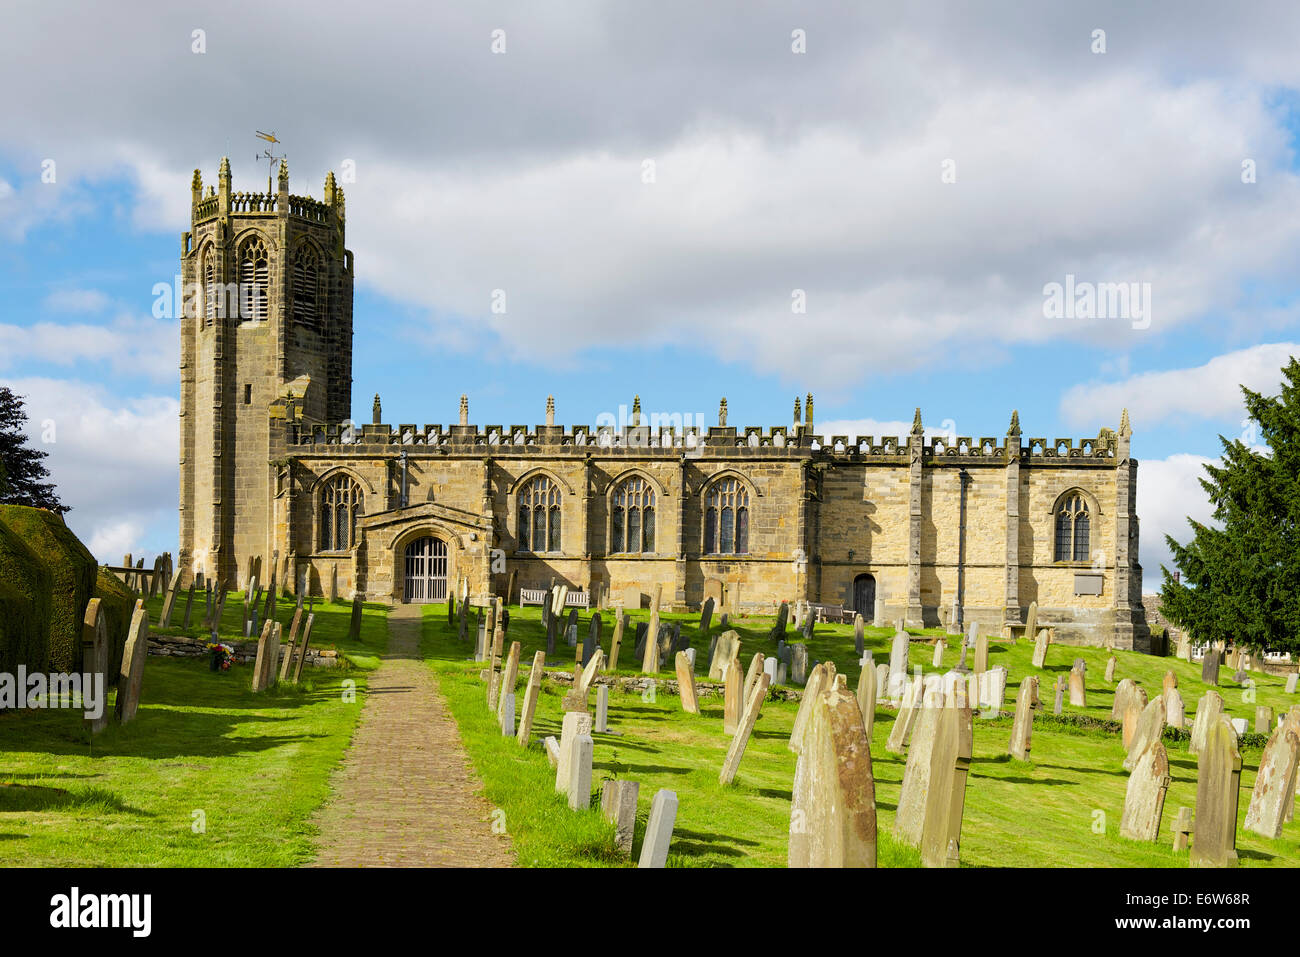 St Michael's Church in the village of Coxwold, North Yorkshire, England UK Stock Photo